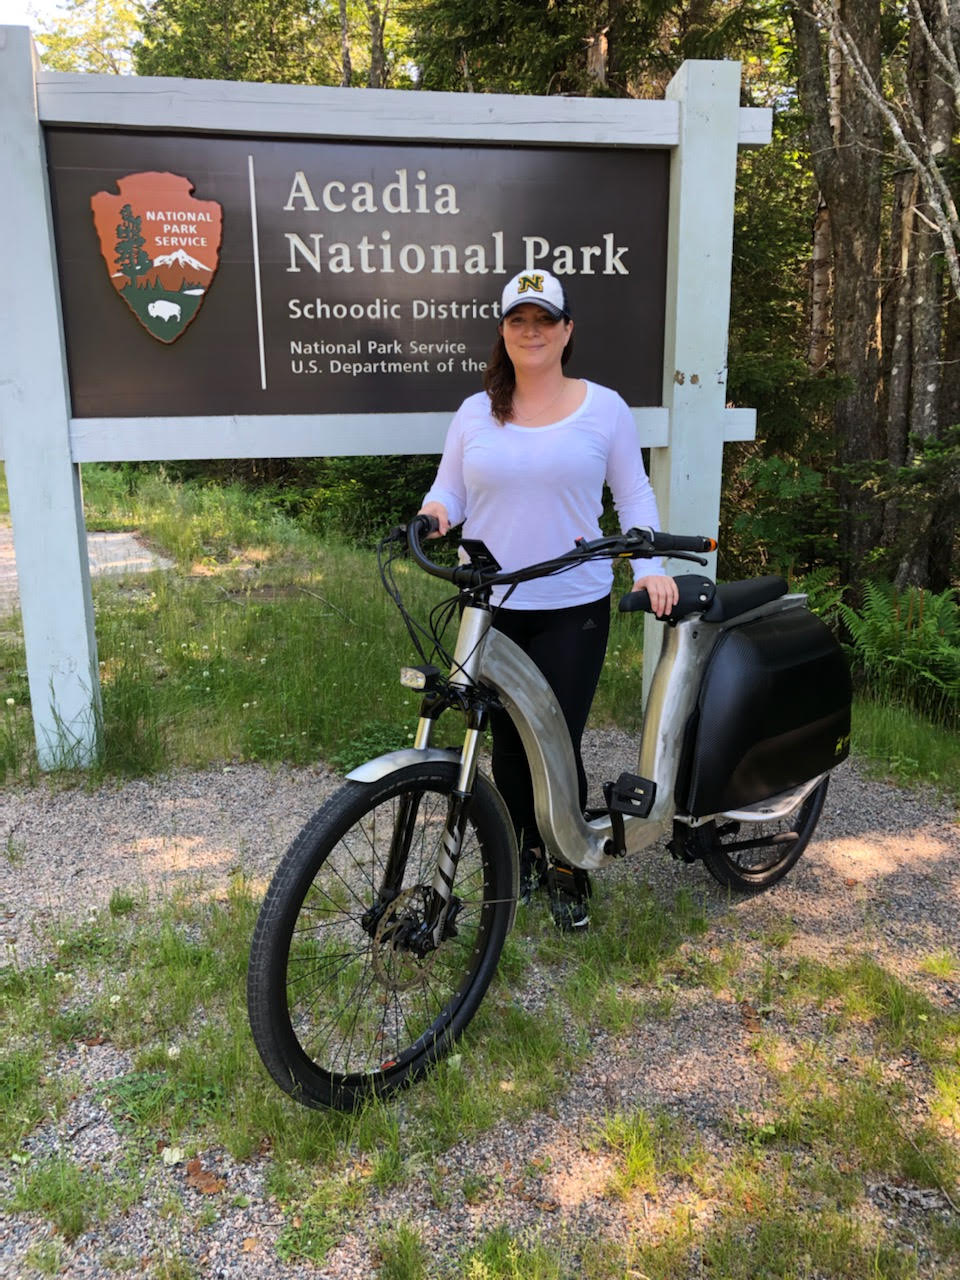 Rosenburg test-riding a Model 1 Civ ebike. She's an adviser for Civilized Cycles, a company that she says "is redefining how people move with the environment in mind."